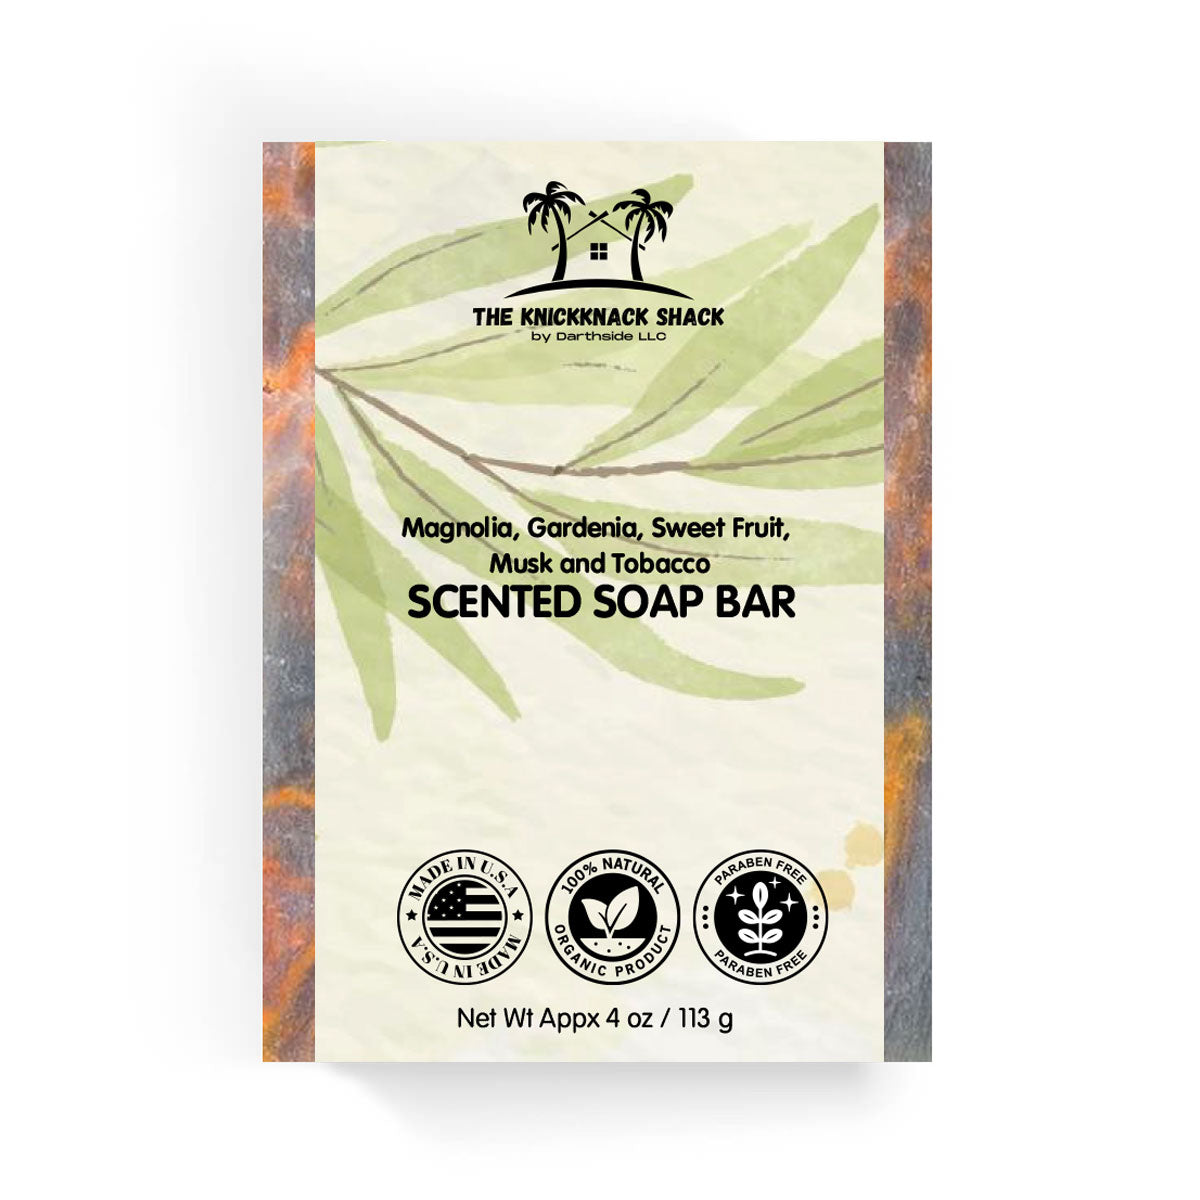 Magnolia, Gardenia, Sweet Fruit, Musk and Tobacco Scented Soap Bar